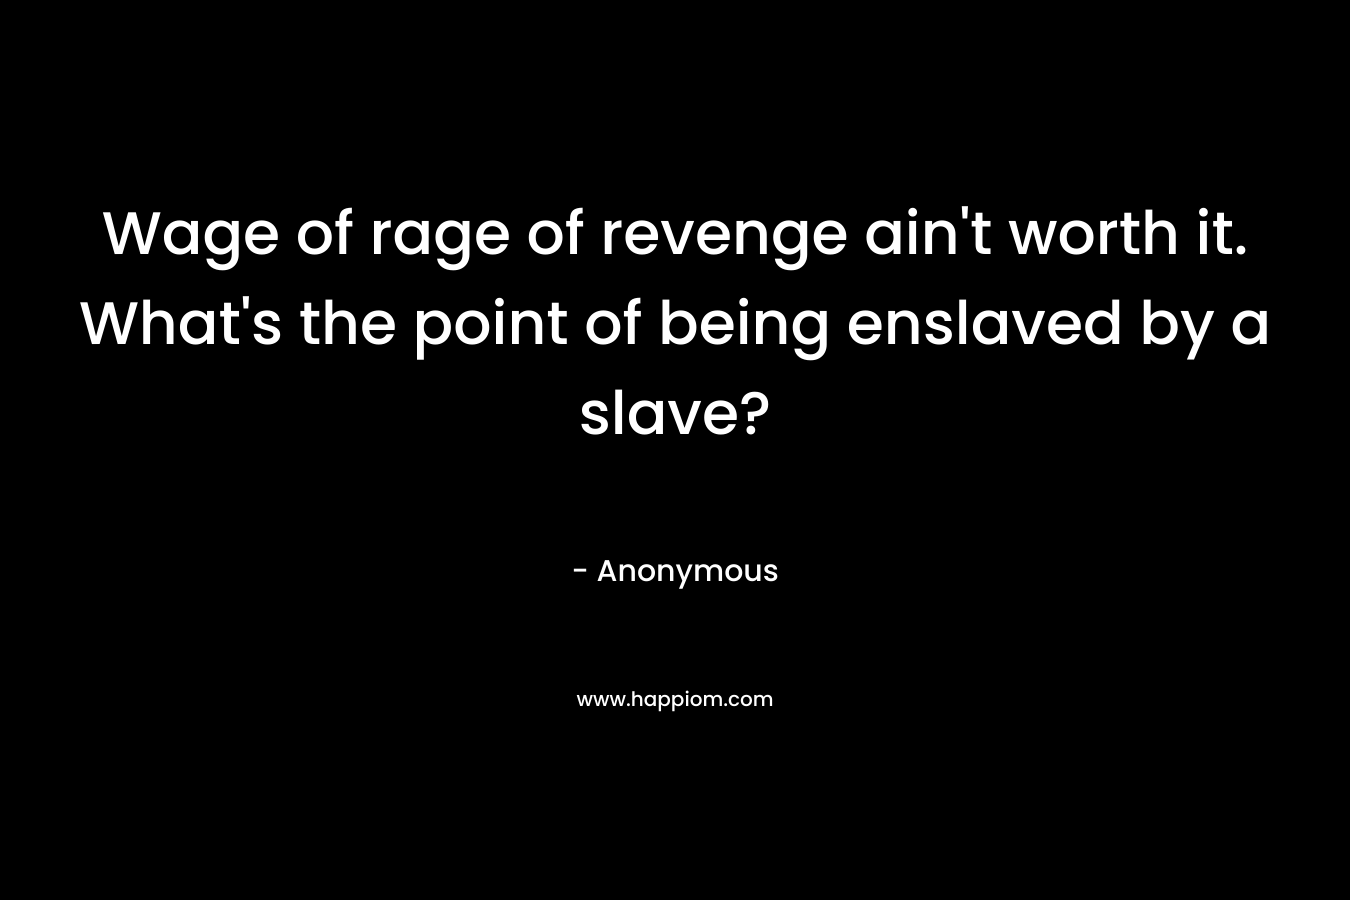 Wage of rage of revenge ain’t worth it. What’s the point of being enslaved by a slave? – Anonymous